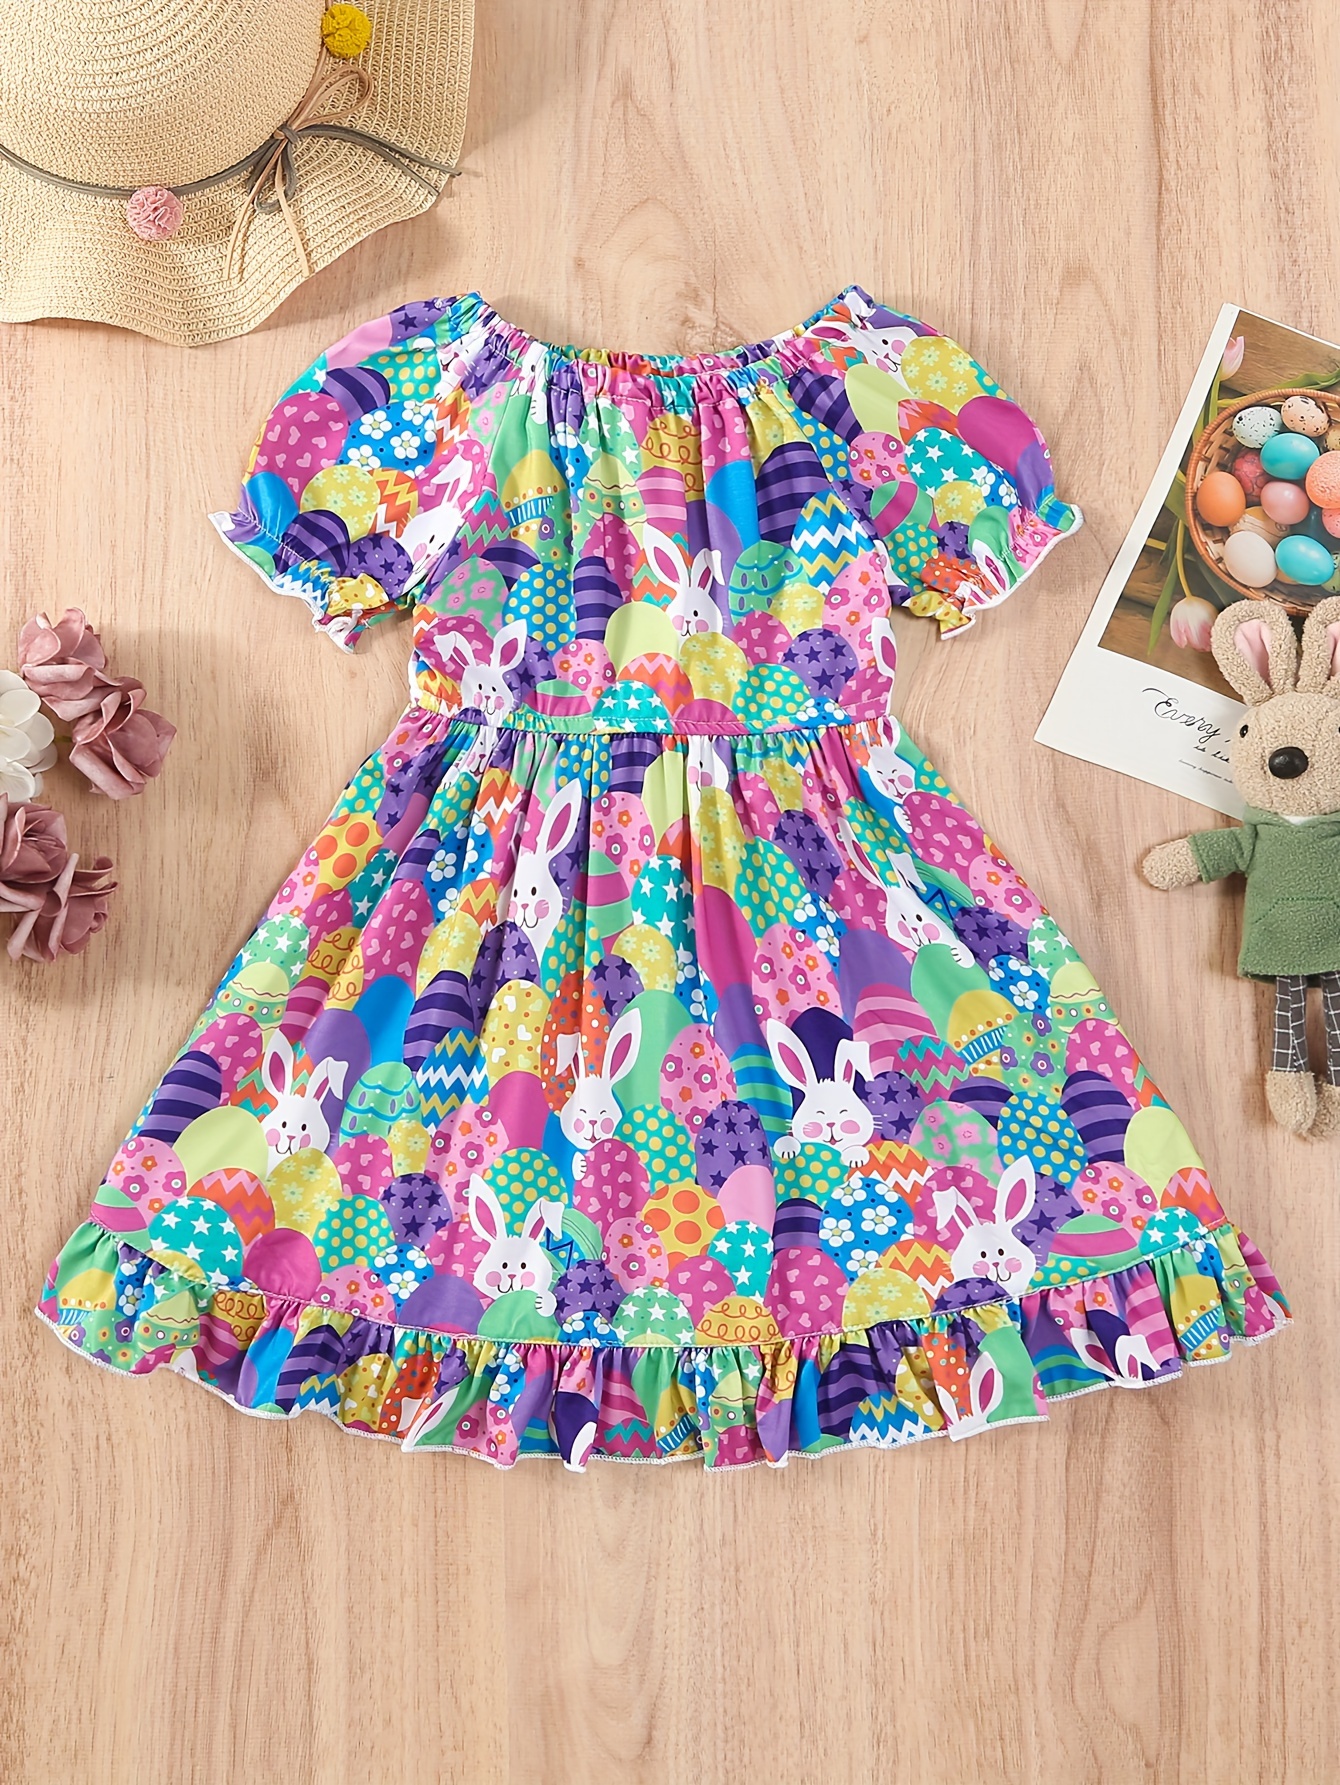 Easter Outfits for Kids: Where to Find the Cutest Easter Outfits